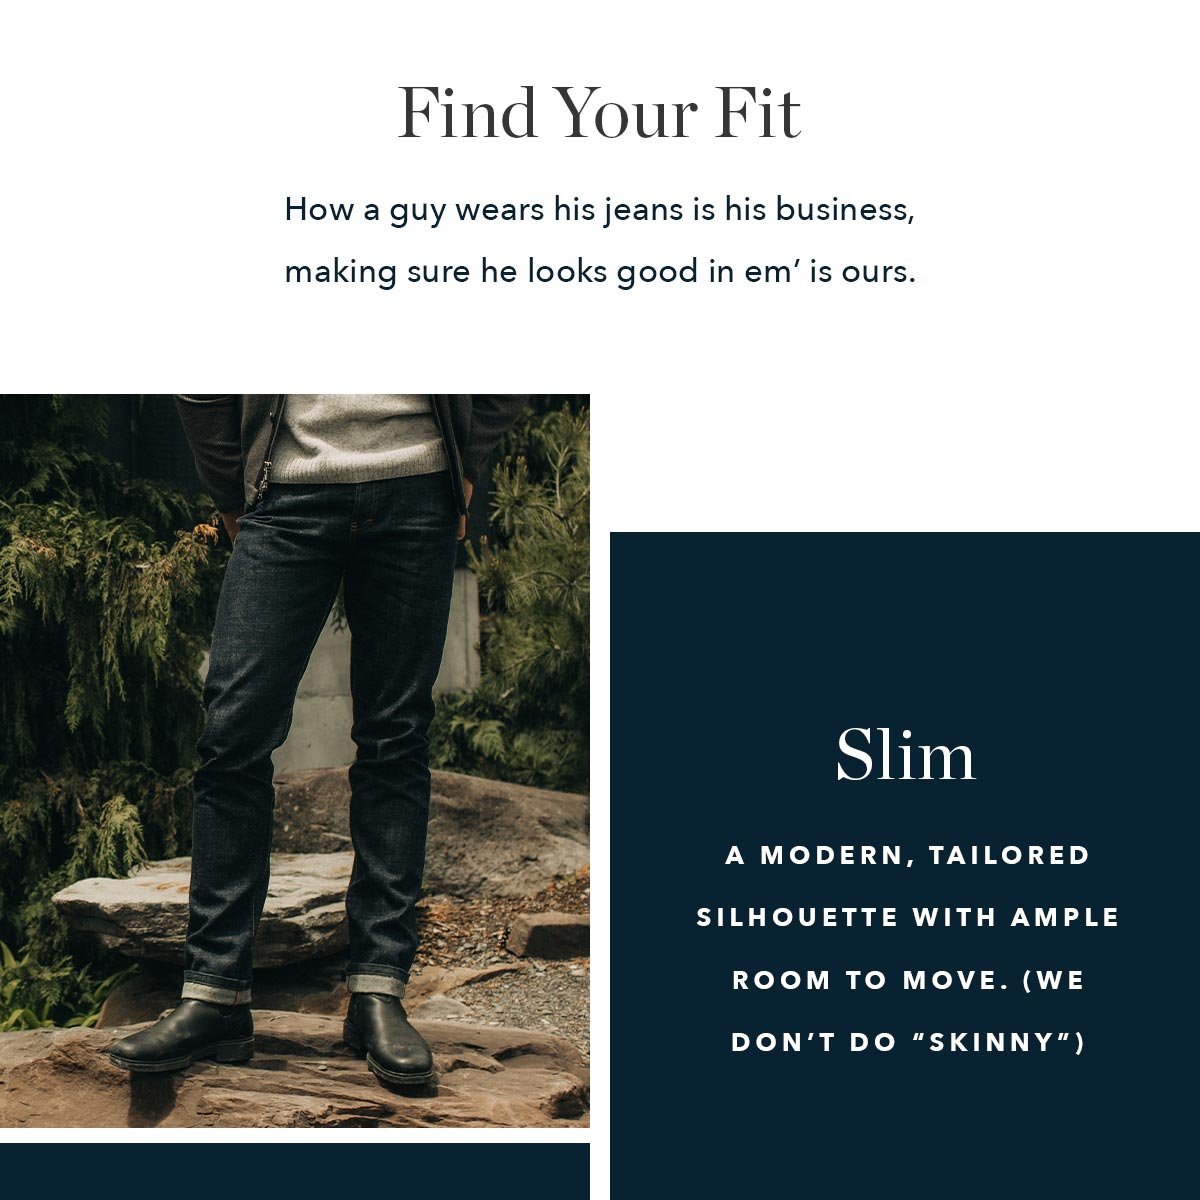 Slim - A modern, tailored silhouette with ample room to move. (We don’t do “skinny”) 